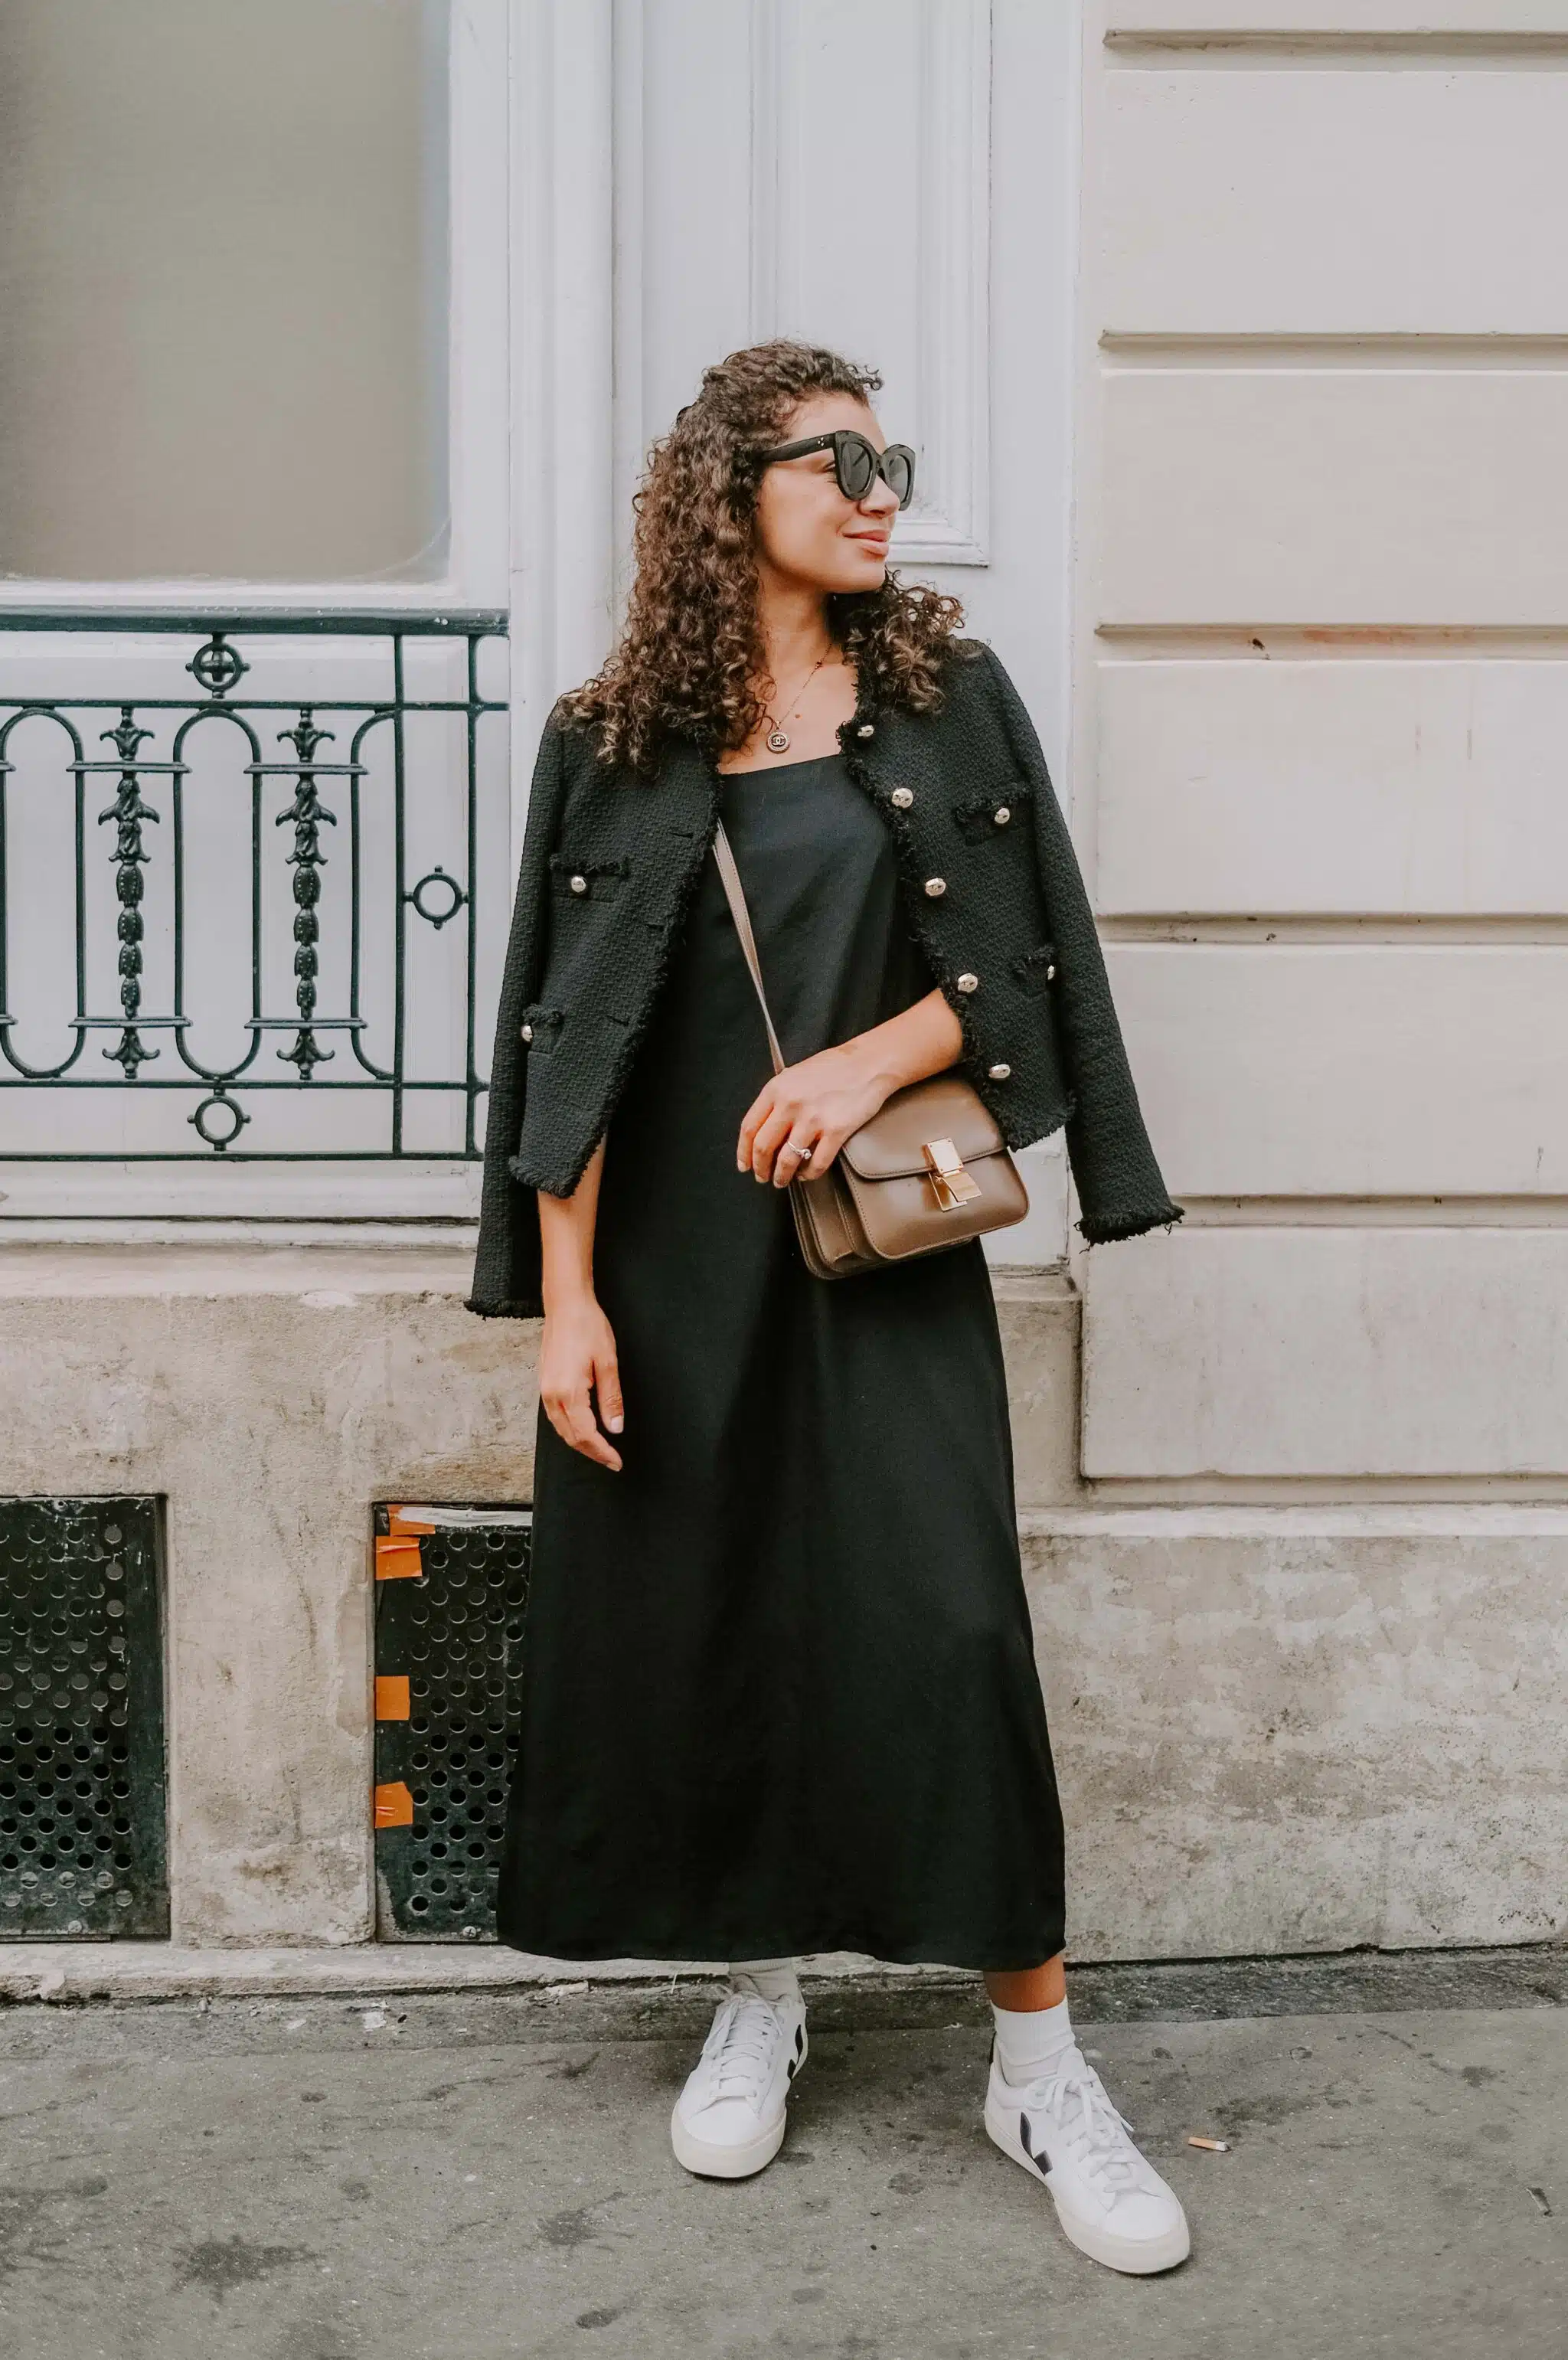 slip dress and lady jacket chic girl outfit